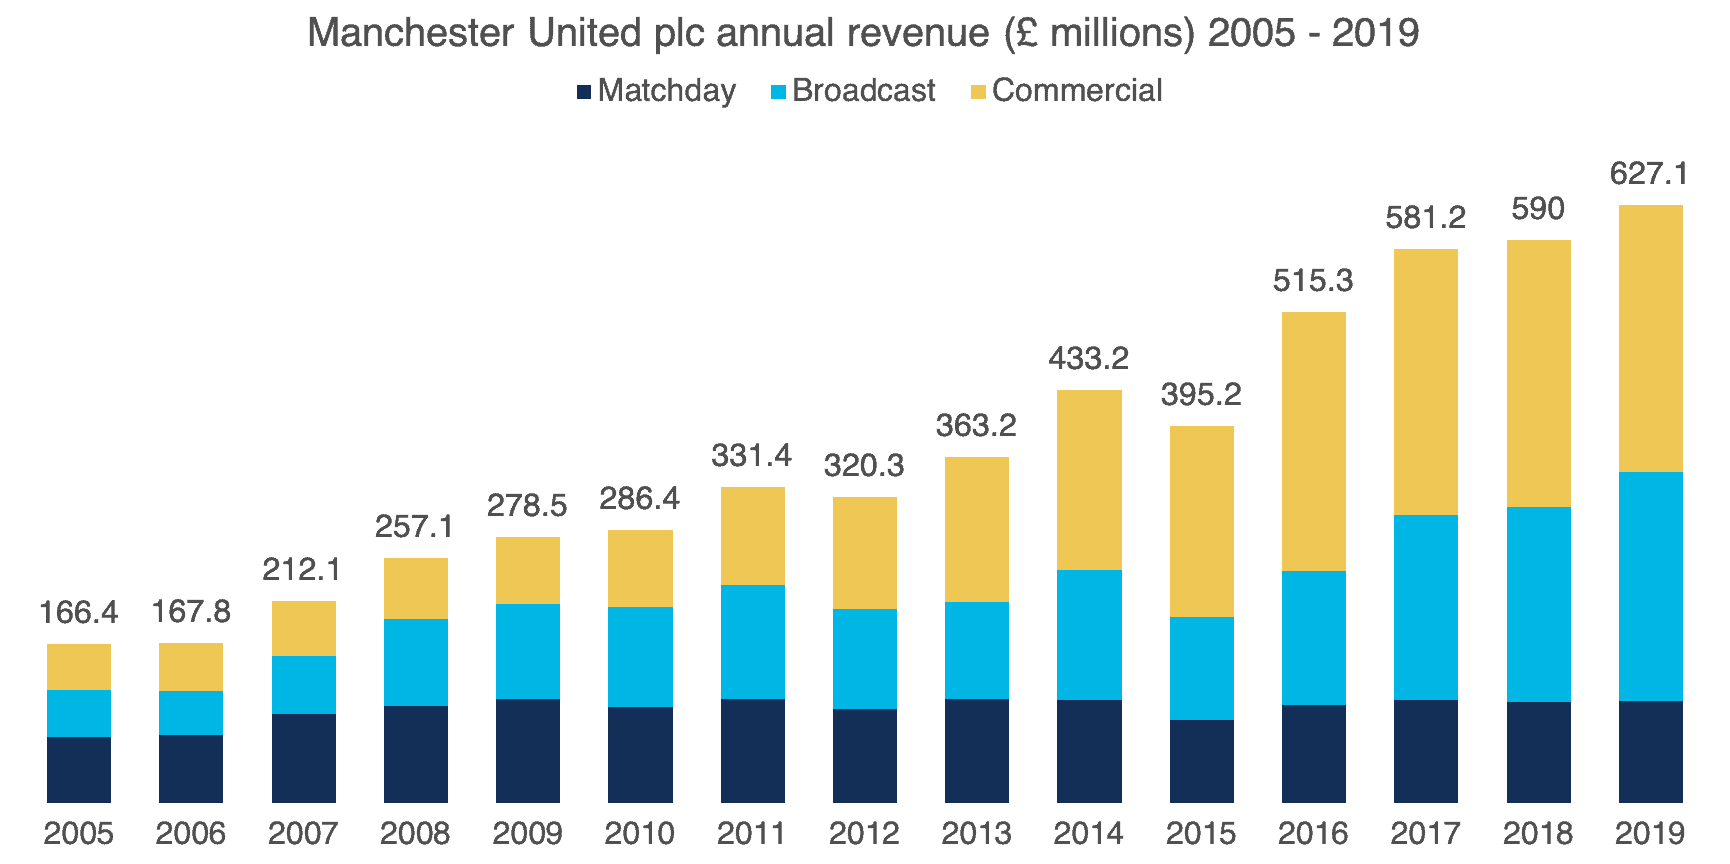 A chart showing Manchester United plc's annual revenue trend 2005 to 2019 broken down in commercial, broadcasting and matchday income